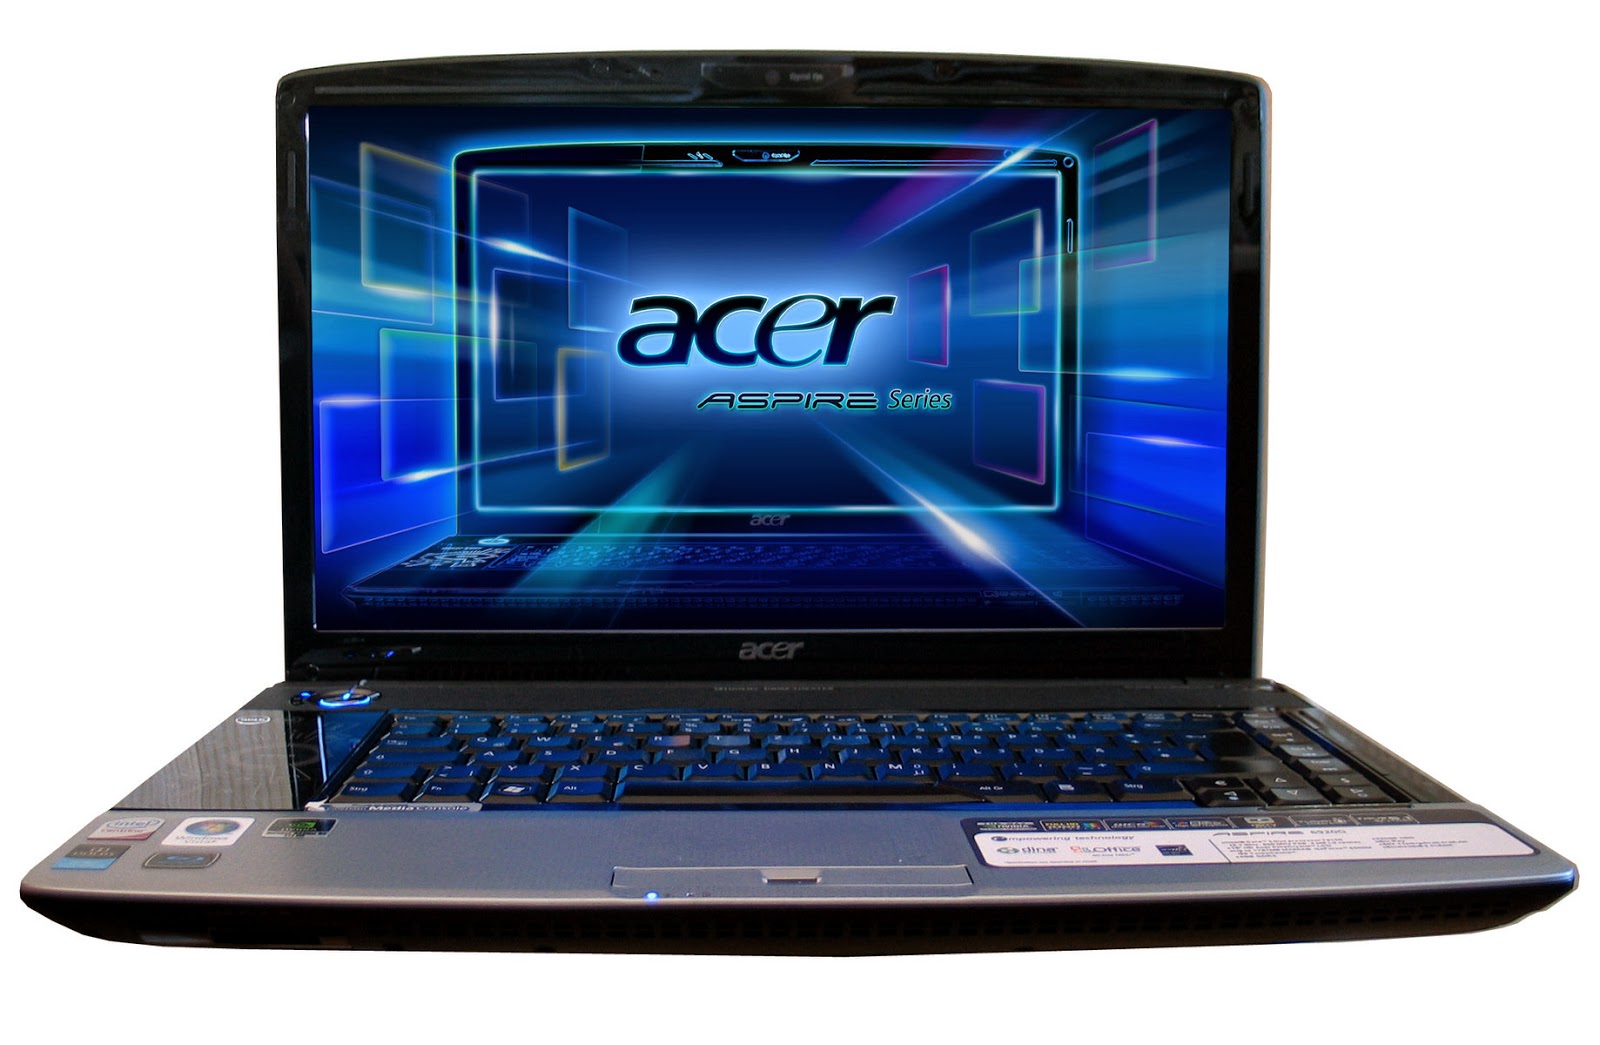 acer aspire 5253 drivers windows 7 free download